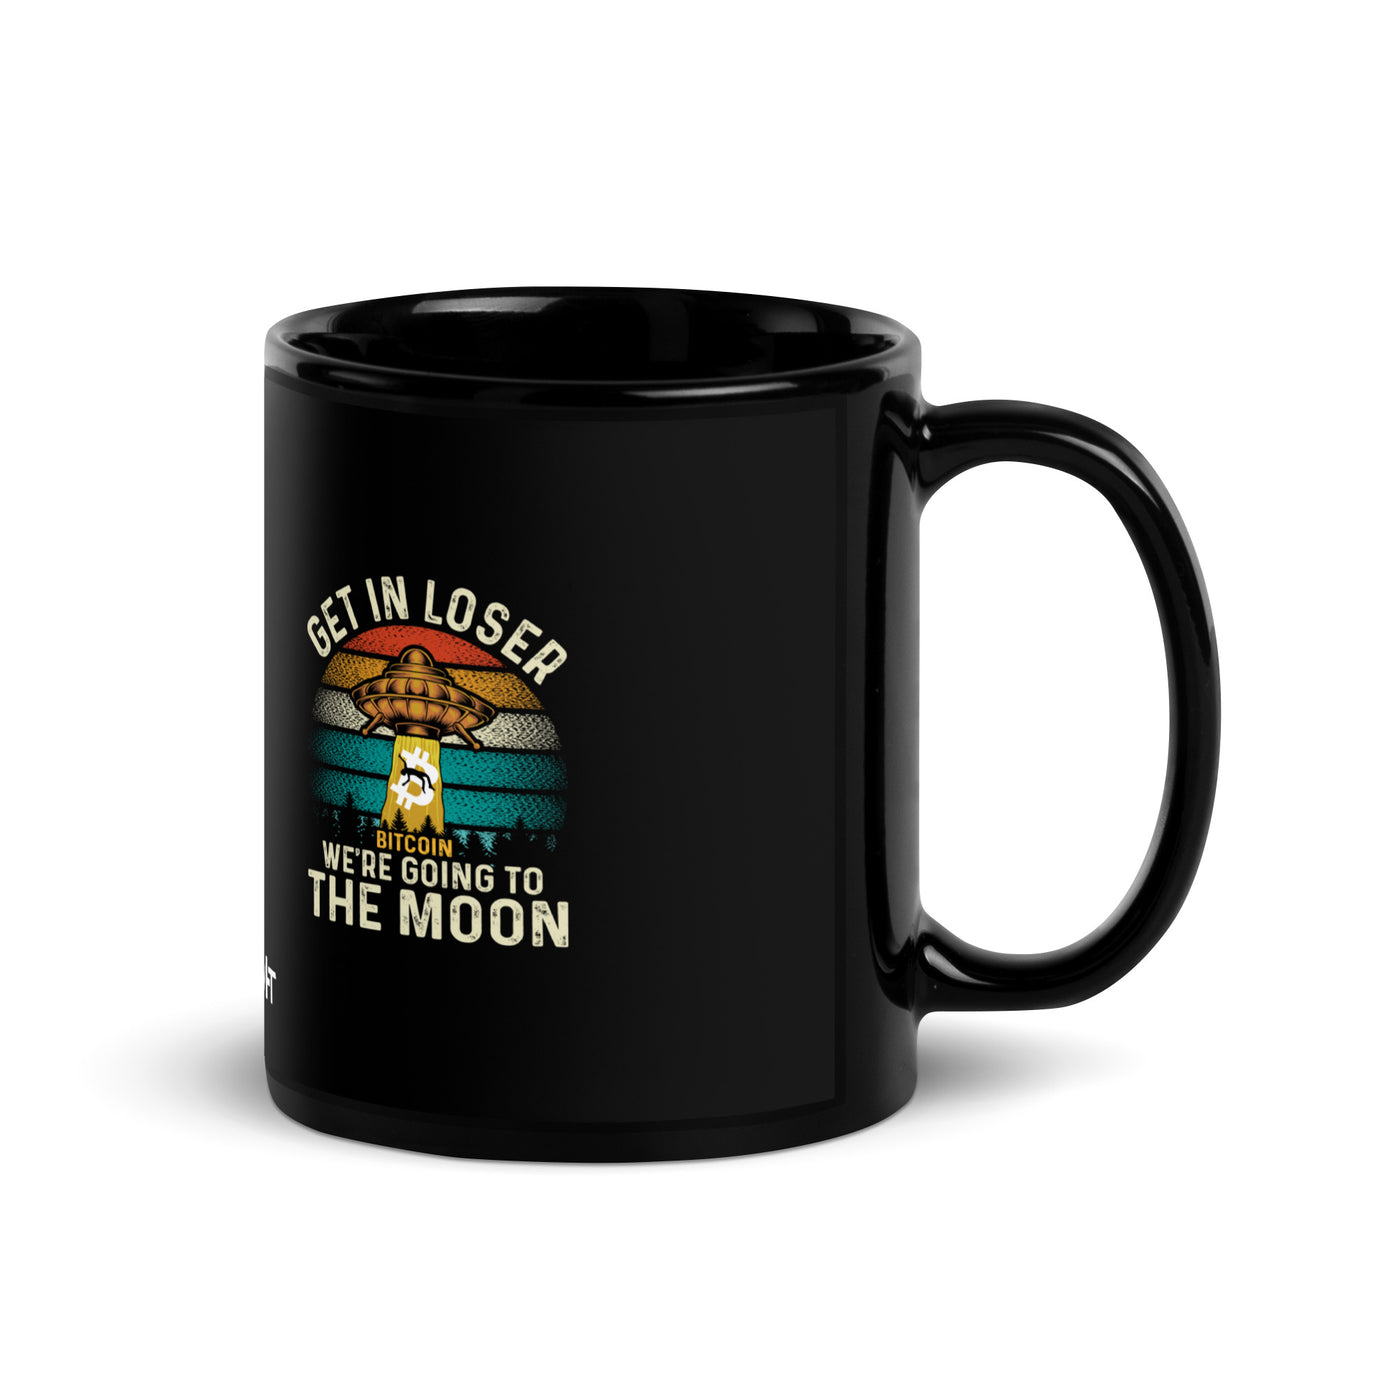 Get in Loser We are going to the Moon - Black Glossy Mug